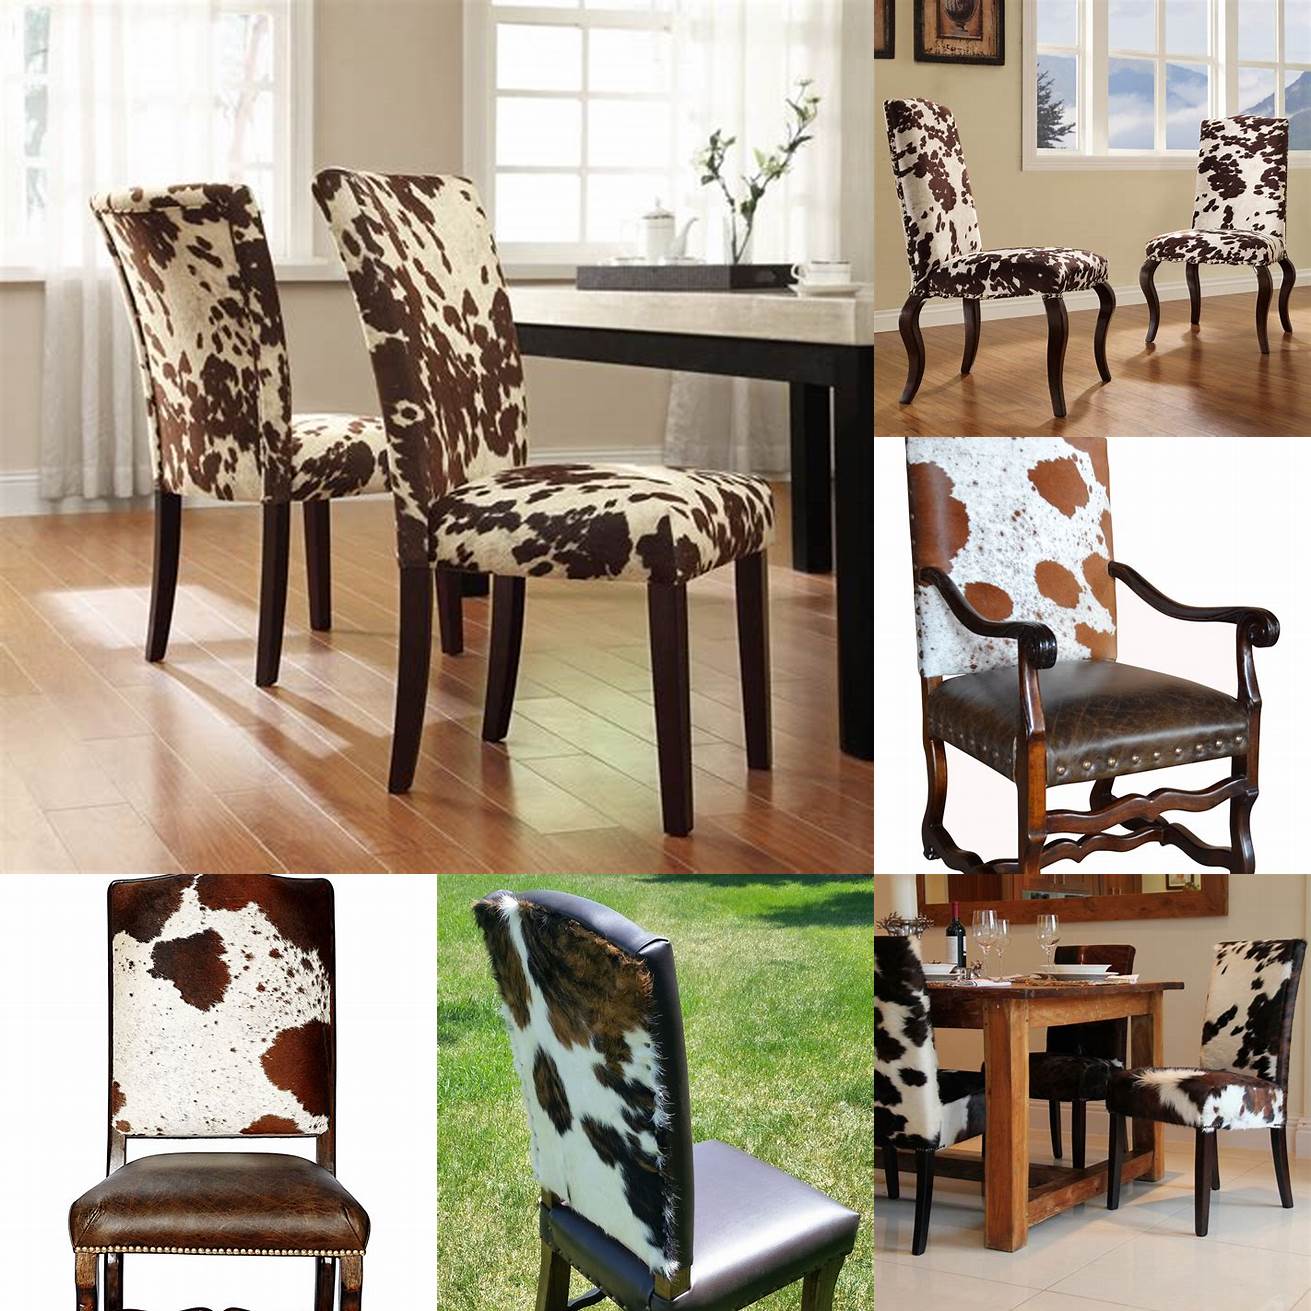 Cowhide dining chairs add a touch of elegance to any dining room The cowhide can be used to create a variety of patterns and designs